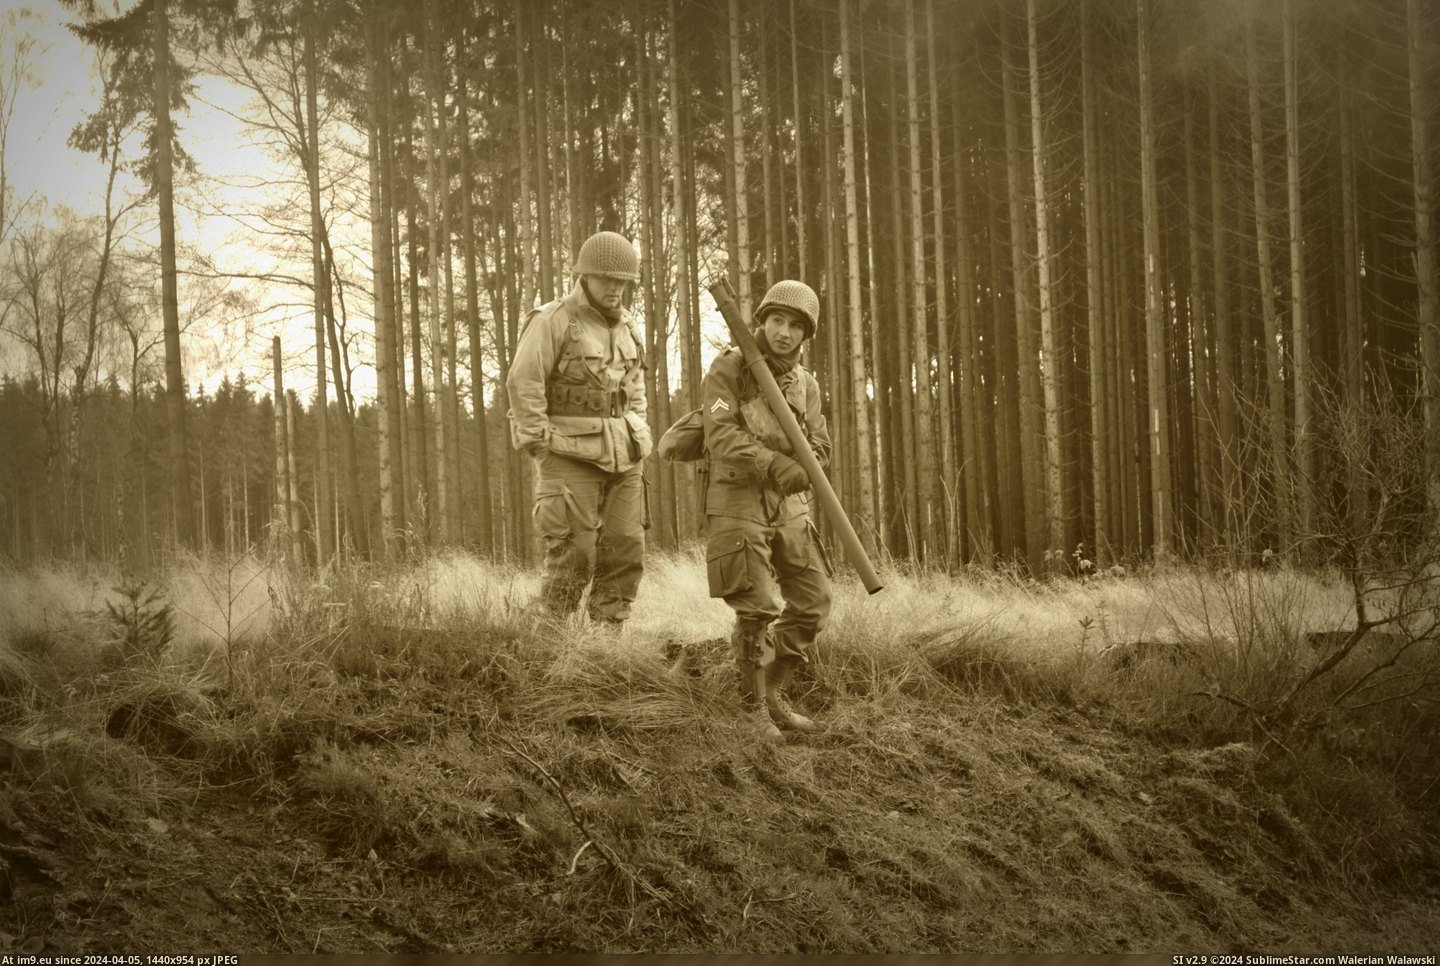 #Years #Ago #Bulge #Bastogne #Foxholes #Couple #Battle [Pics] Battle of the Bulge started today in 1944. Went to Bastogne a couple years ago and took pictures. The foxholes of the 101 Pic. (Изображение из альбом My r/PICS favs))